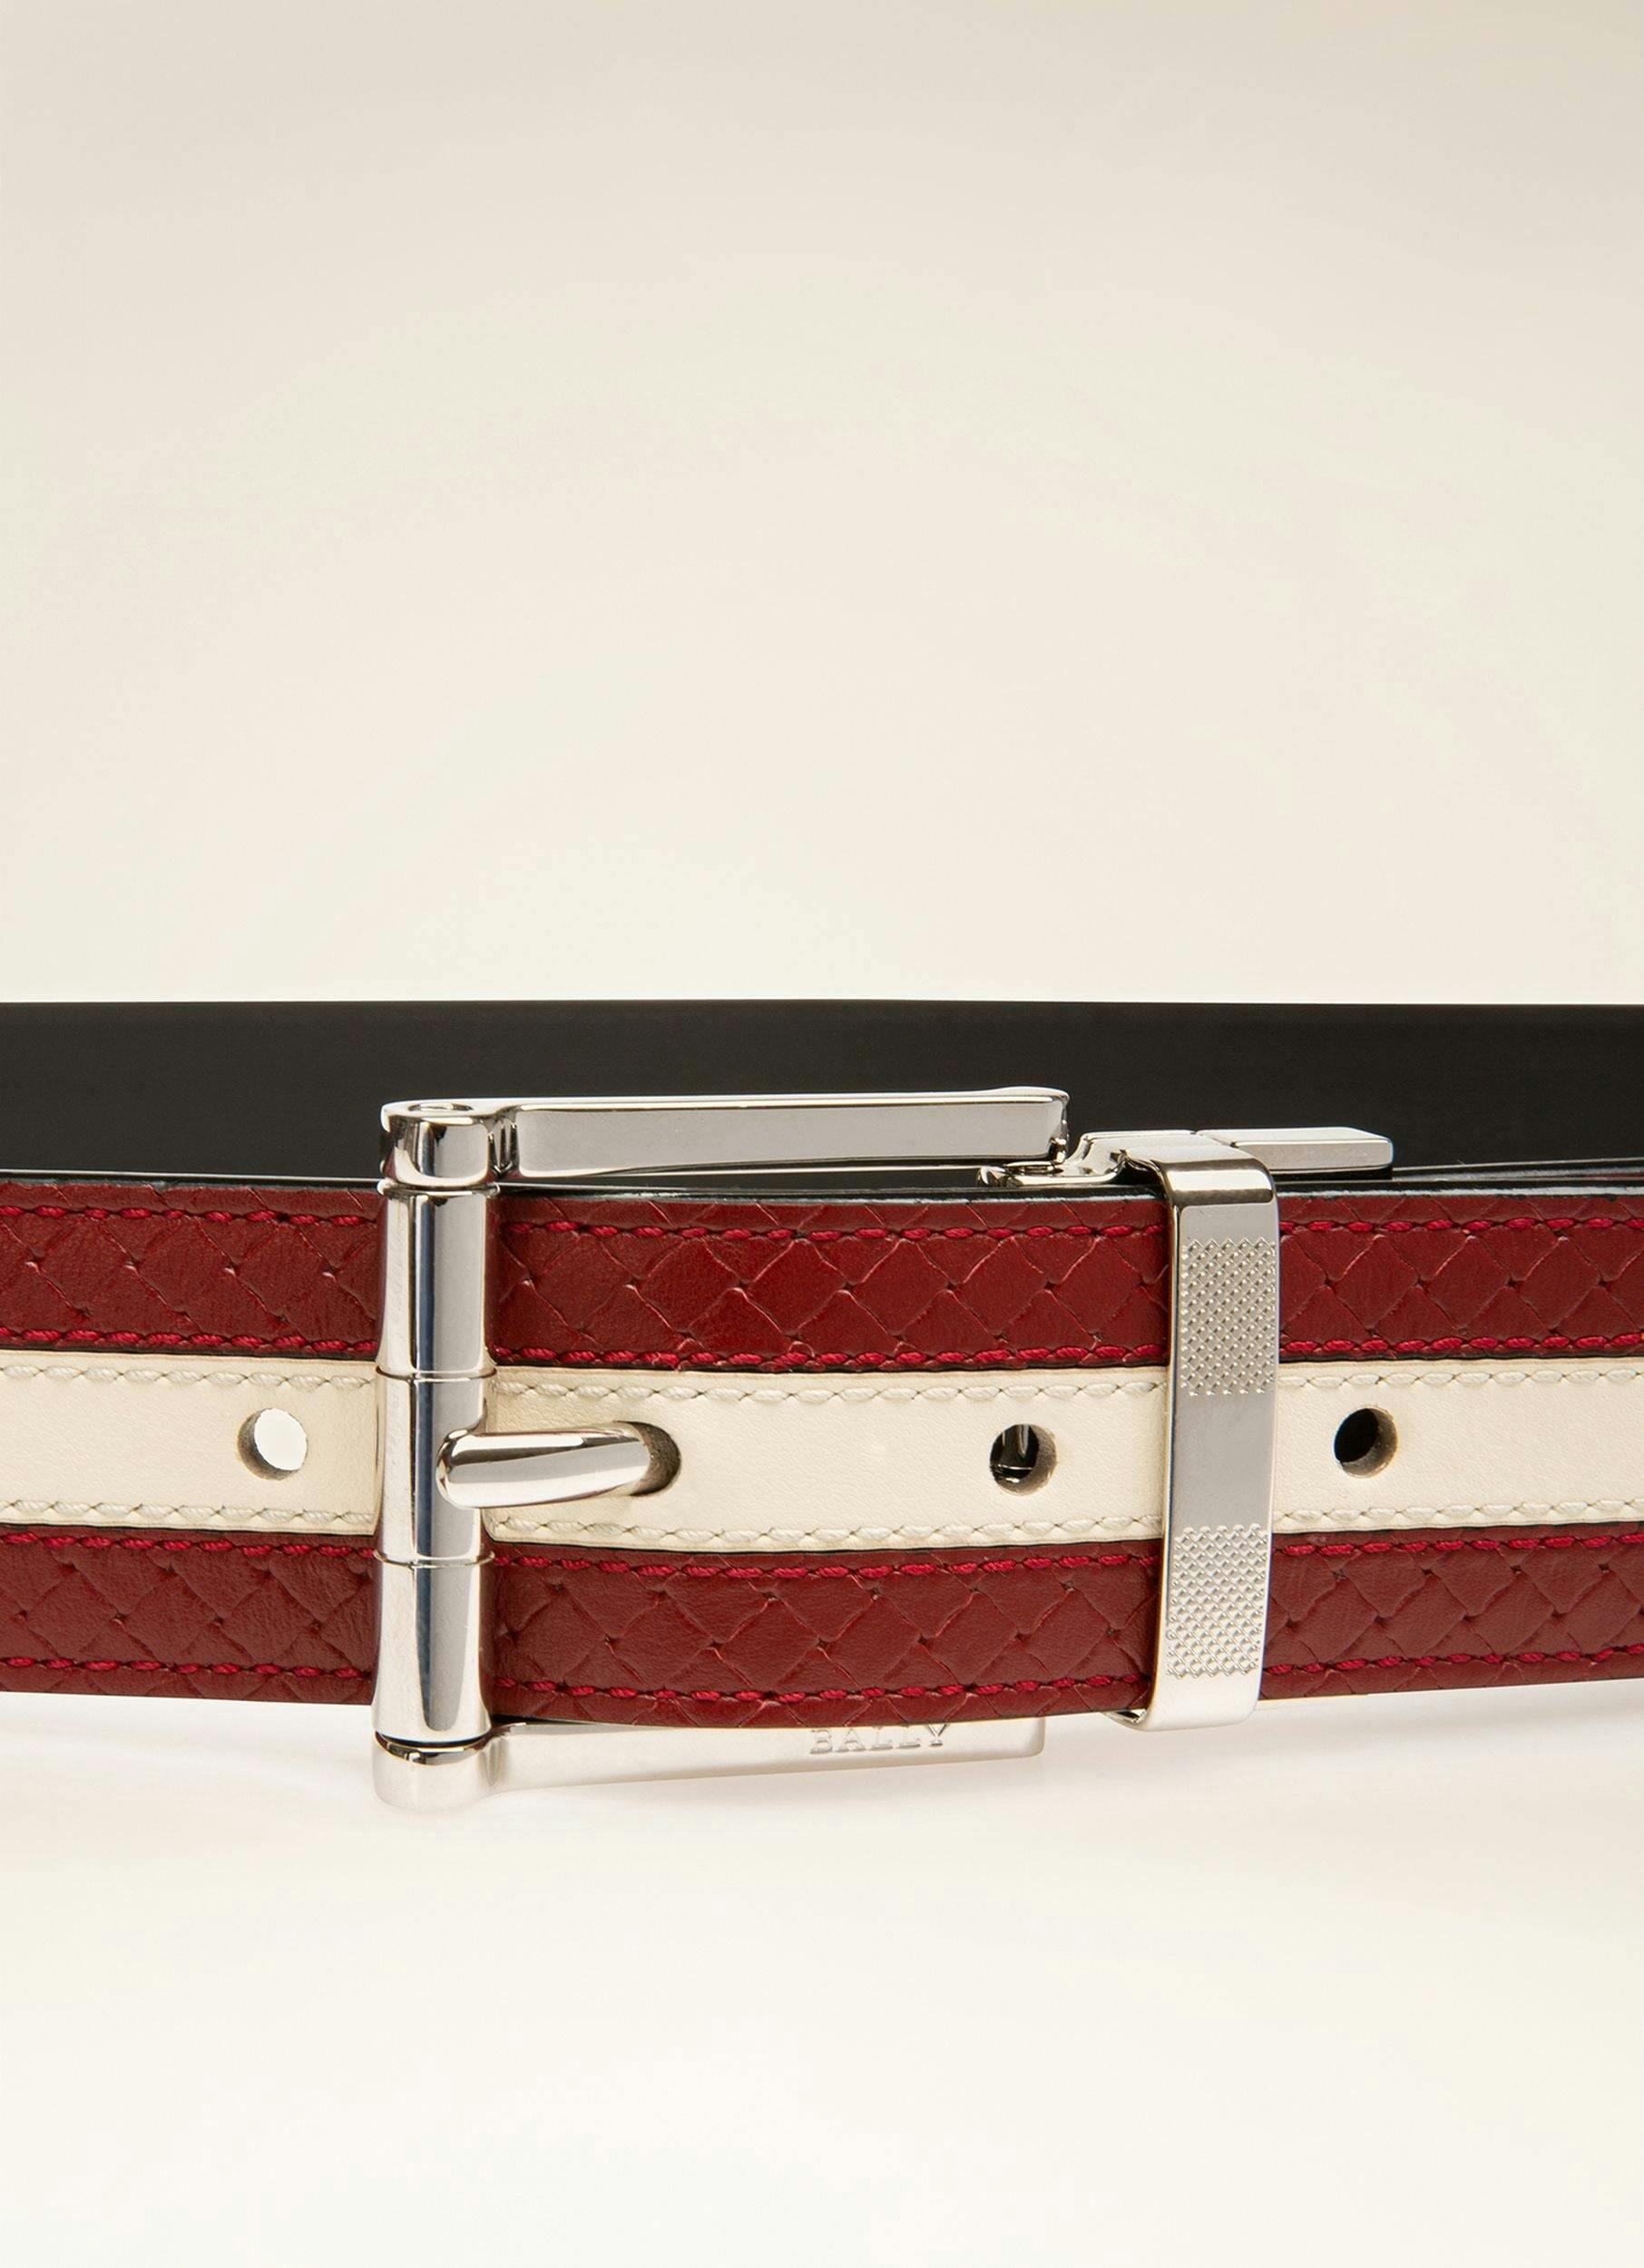 CASUAL Leather 35Mm Belt In Bally Red & Black - Men's - Bally - 02